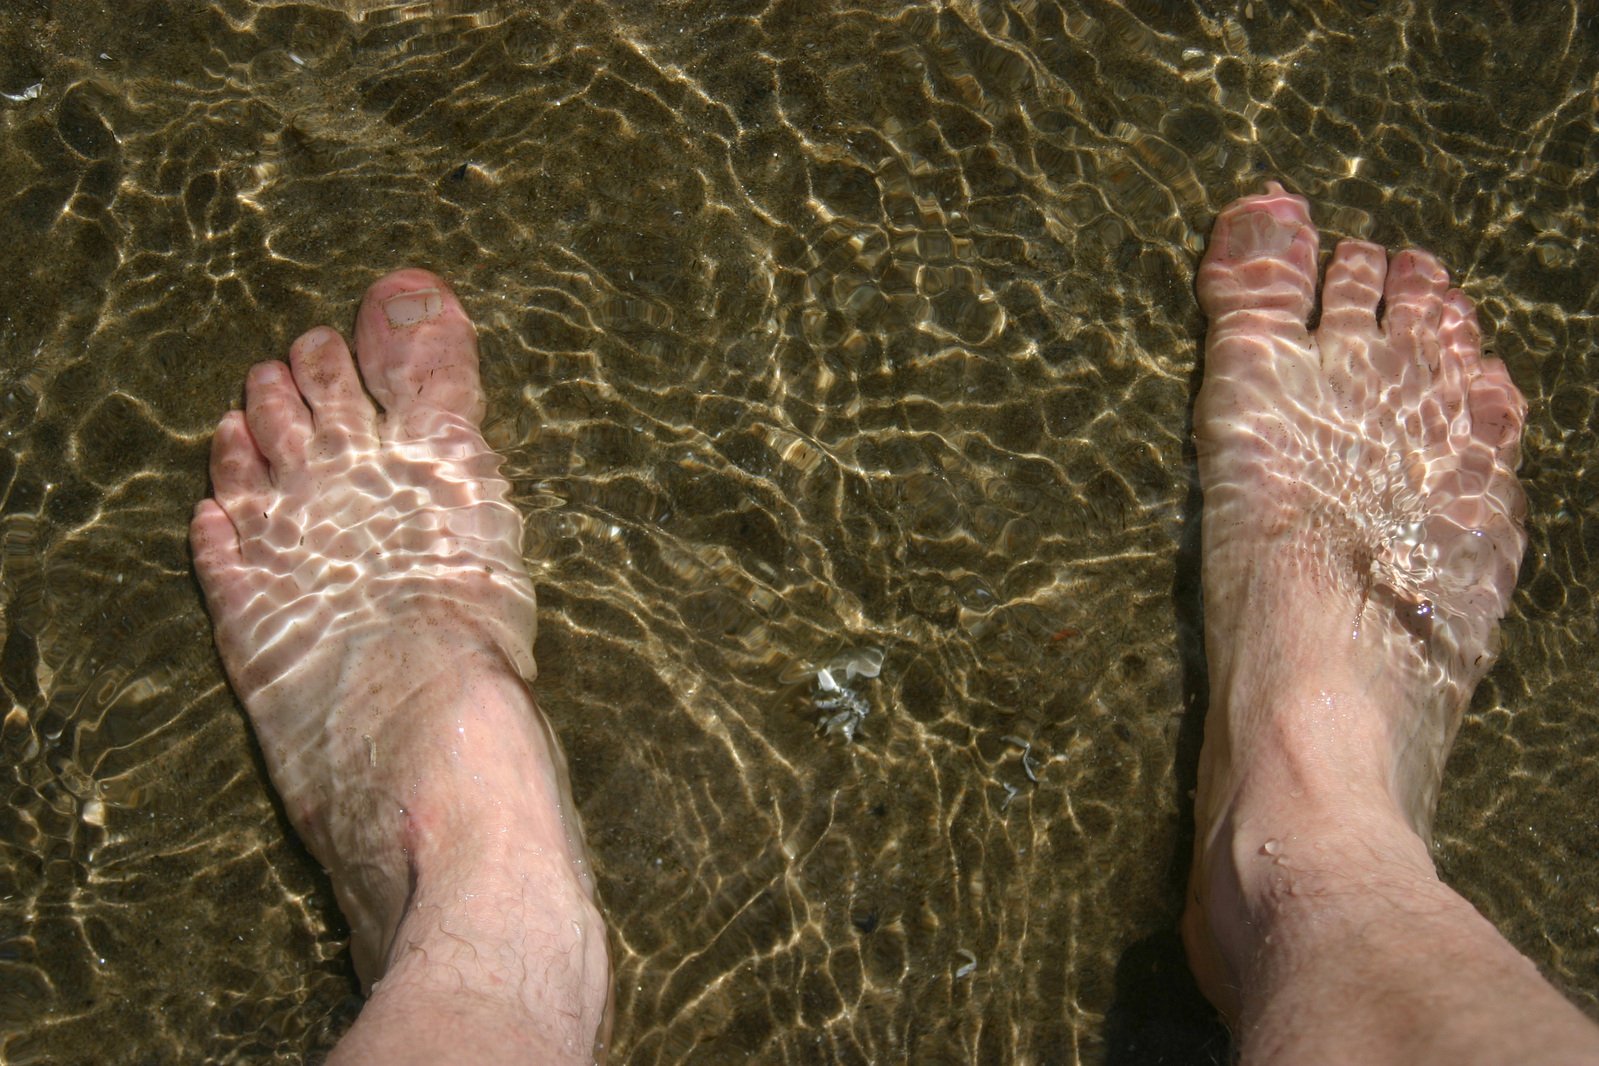 a person standing in water with his bare feet up